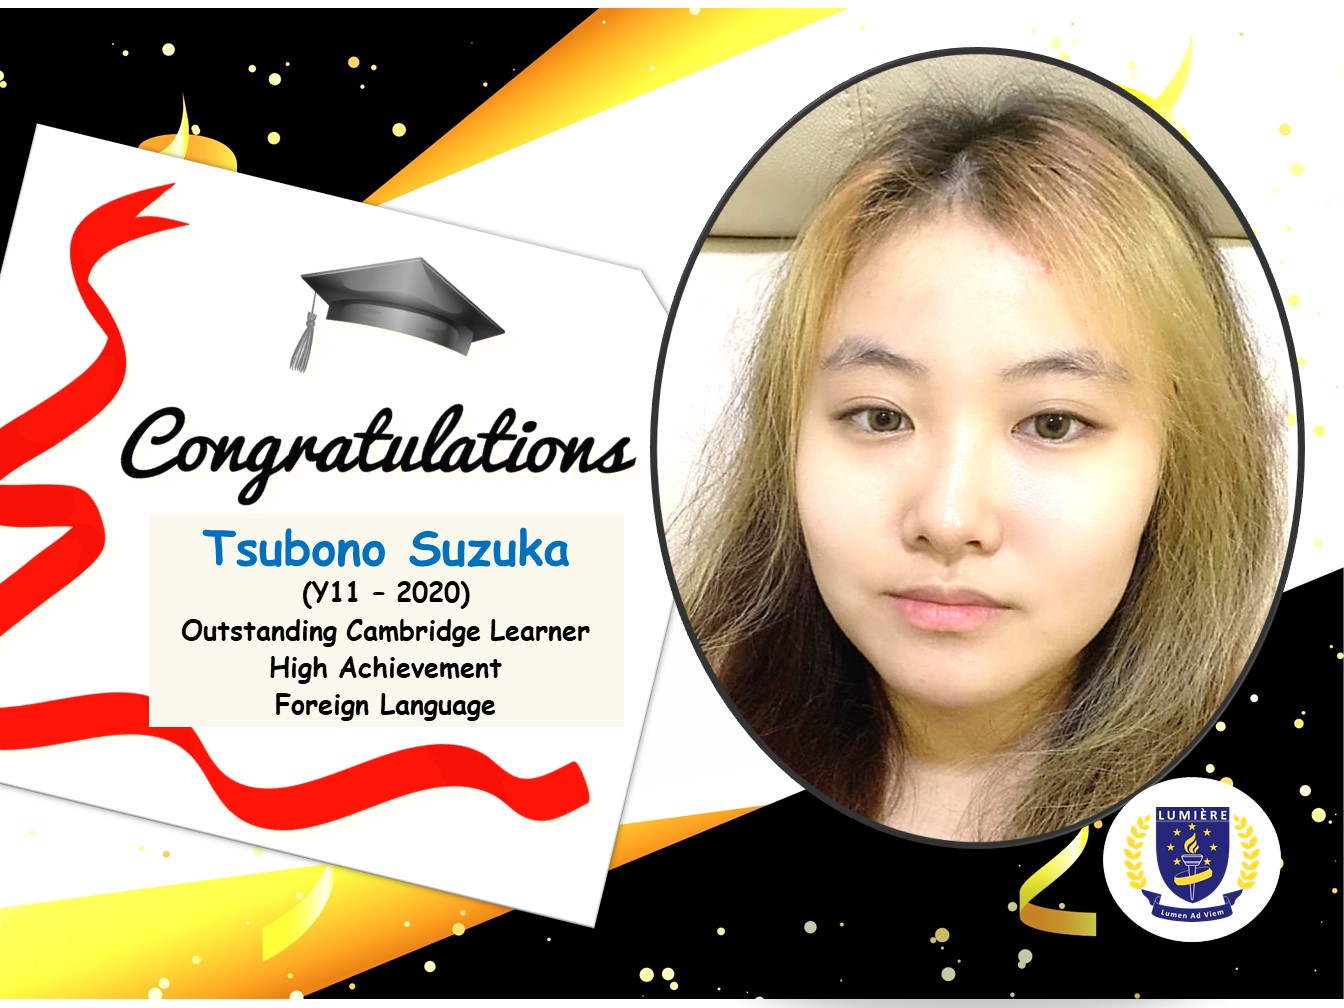 32-outstanding-cambridge-learner-from-lumiere-academy-homeschool-centre.jpg